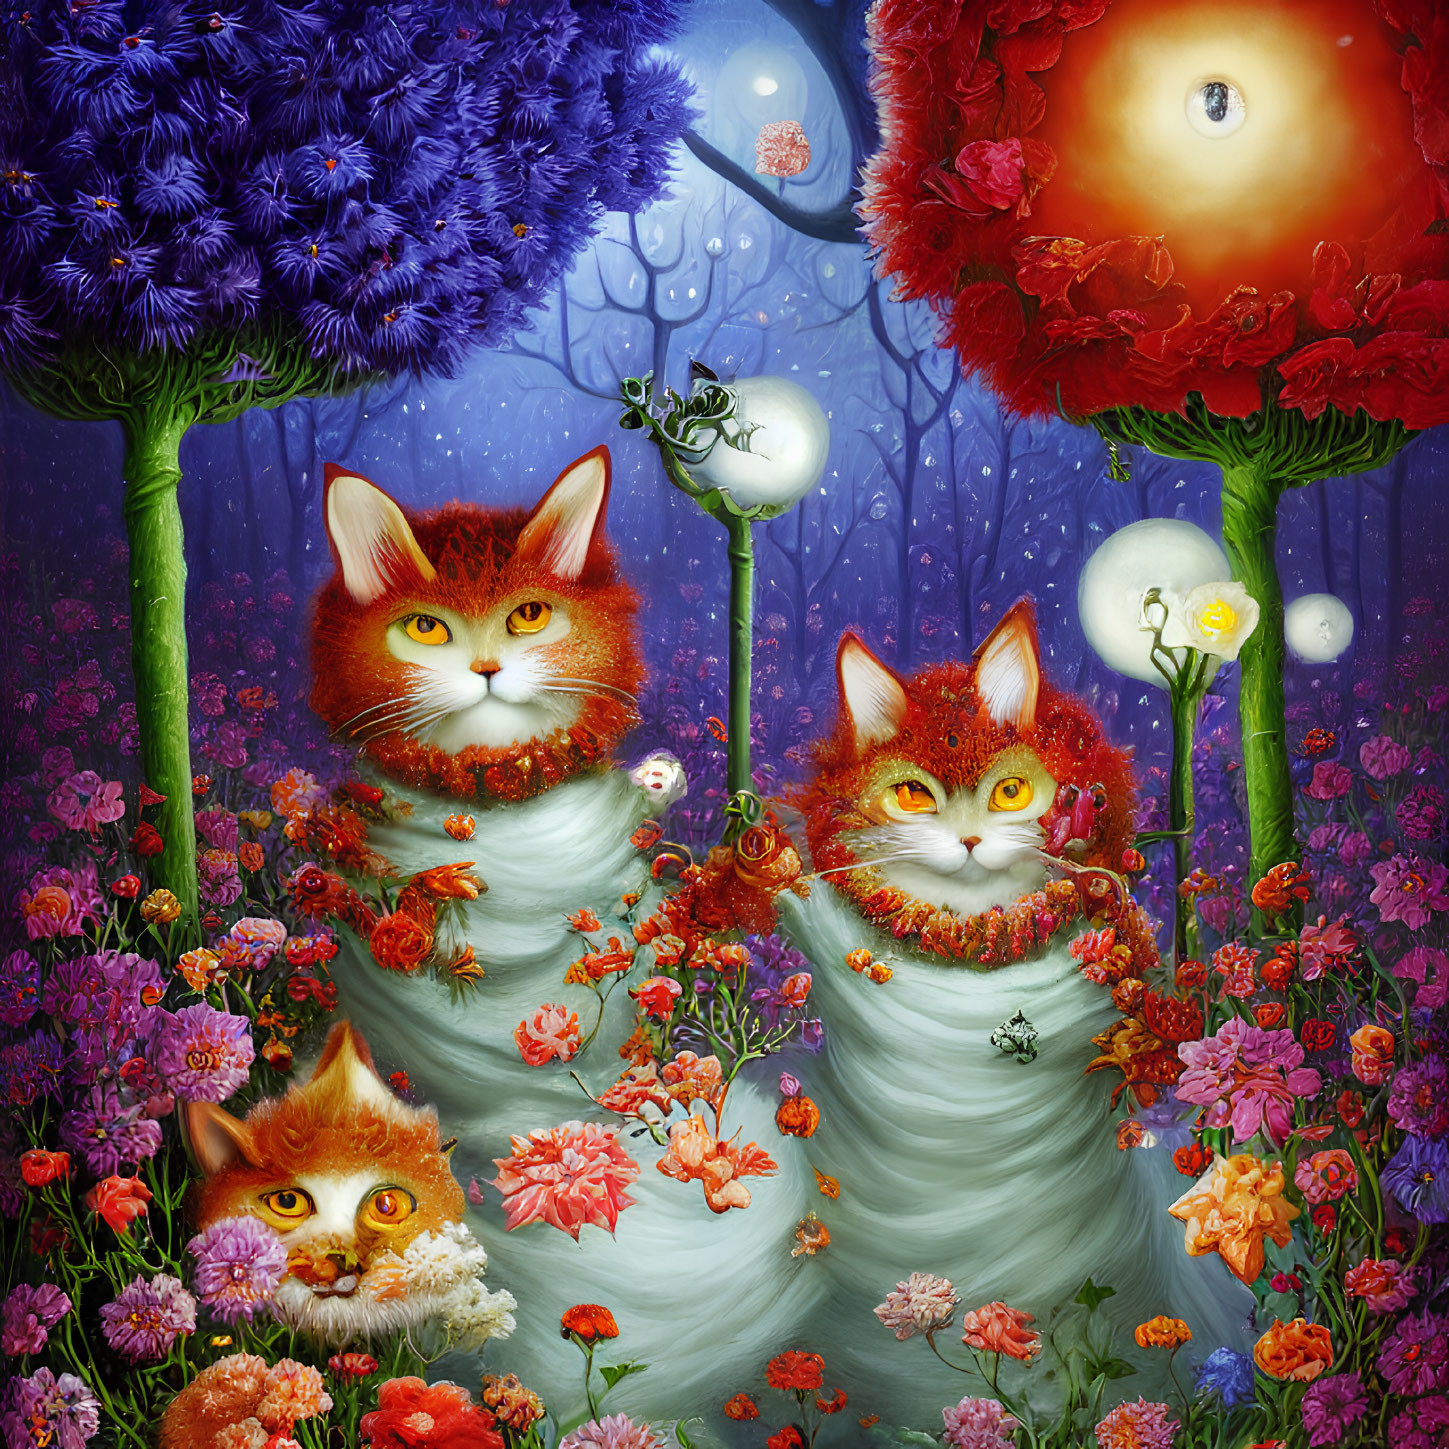 Colorful artwork: Three cats with human-like eyes among oversized flowers on magical blue backdrop